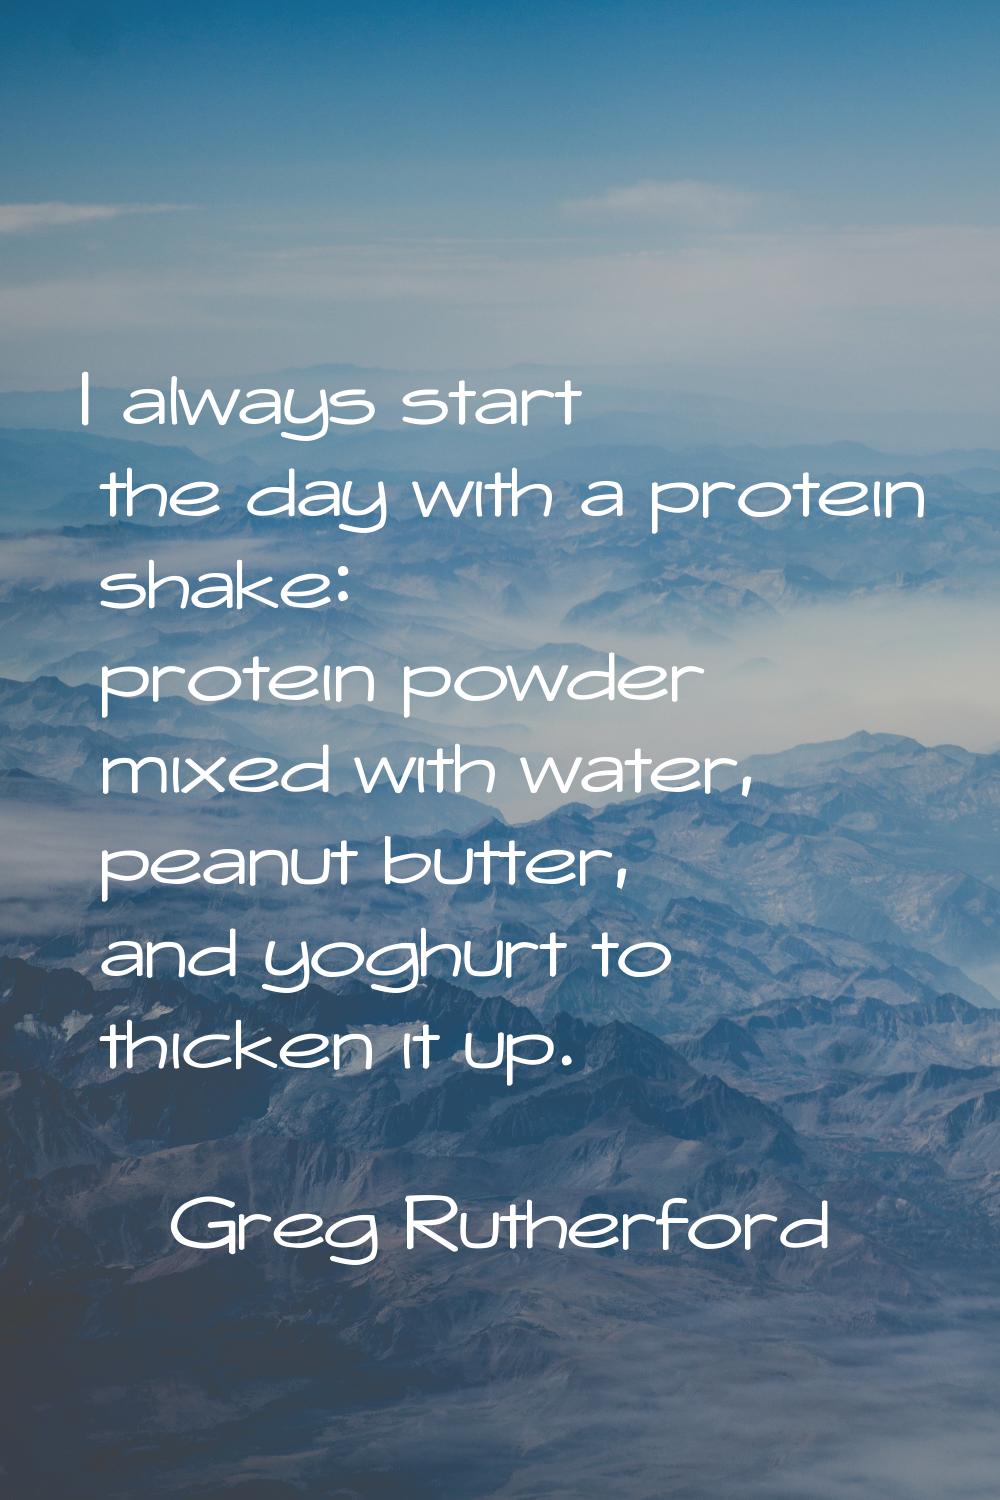 I always start the day with a protein shake: protein powder mixed with water, peanut butter, and yo